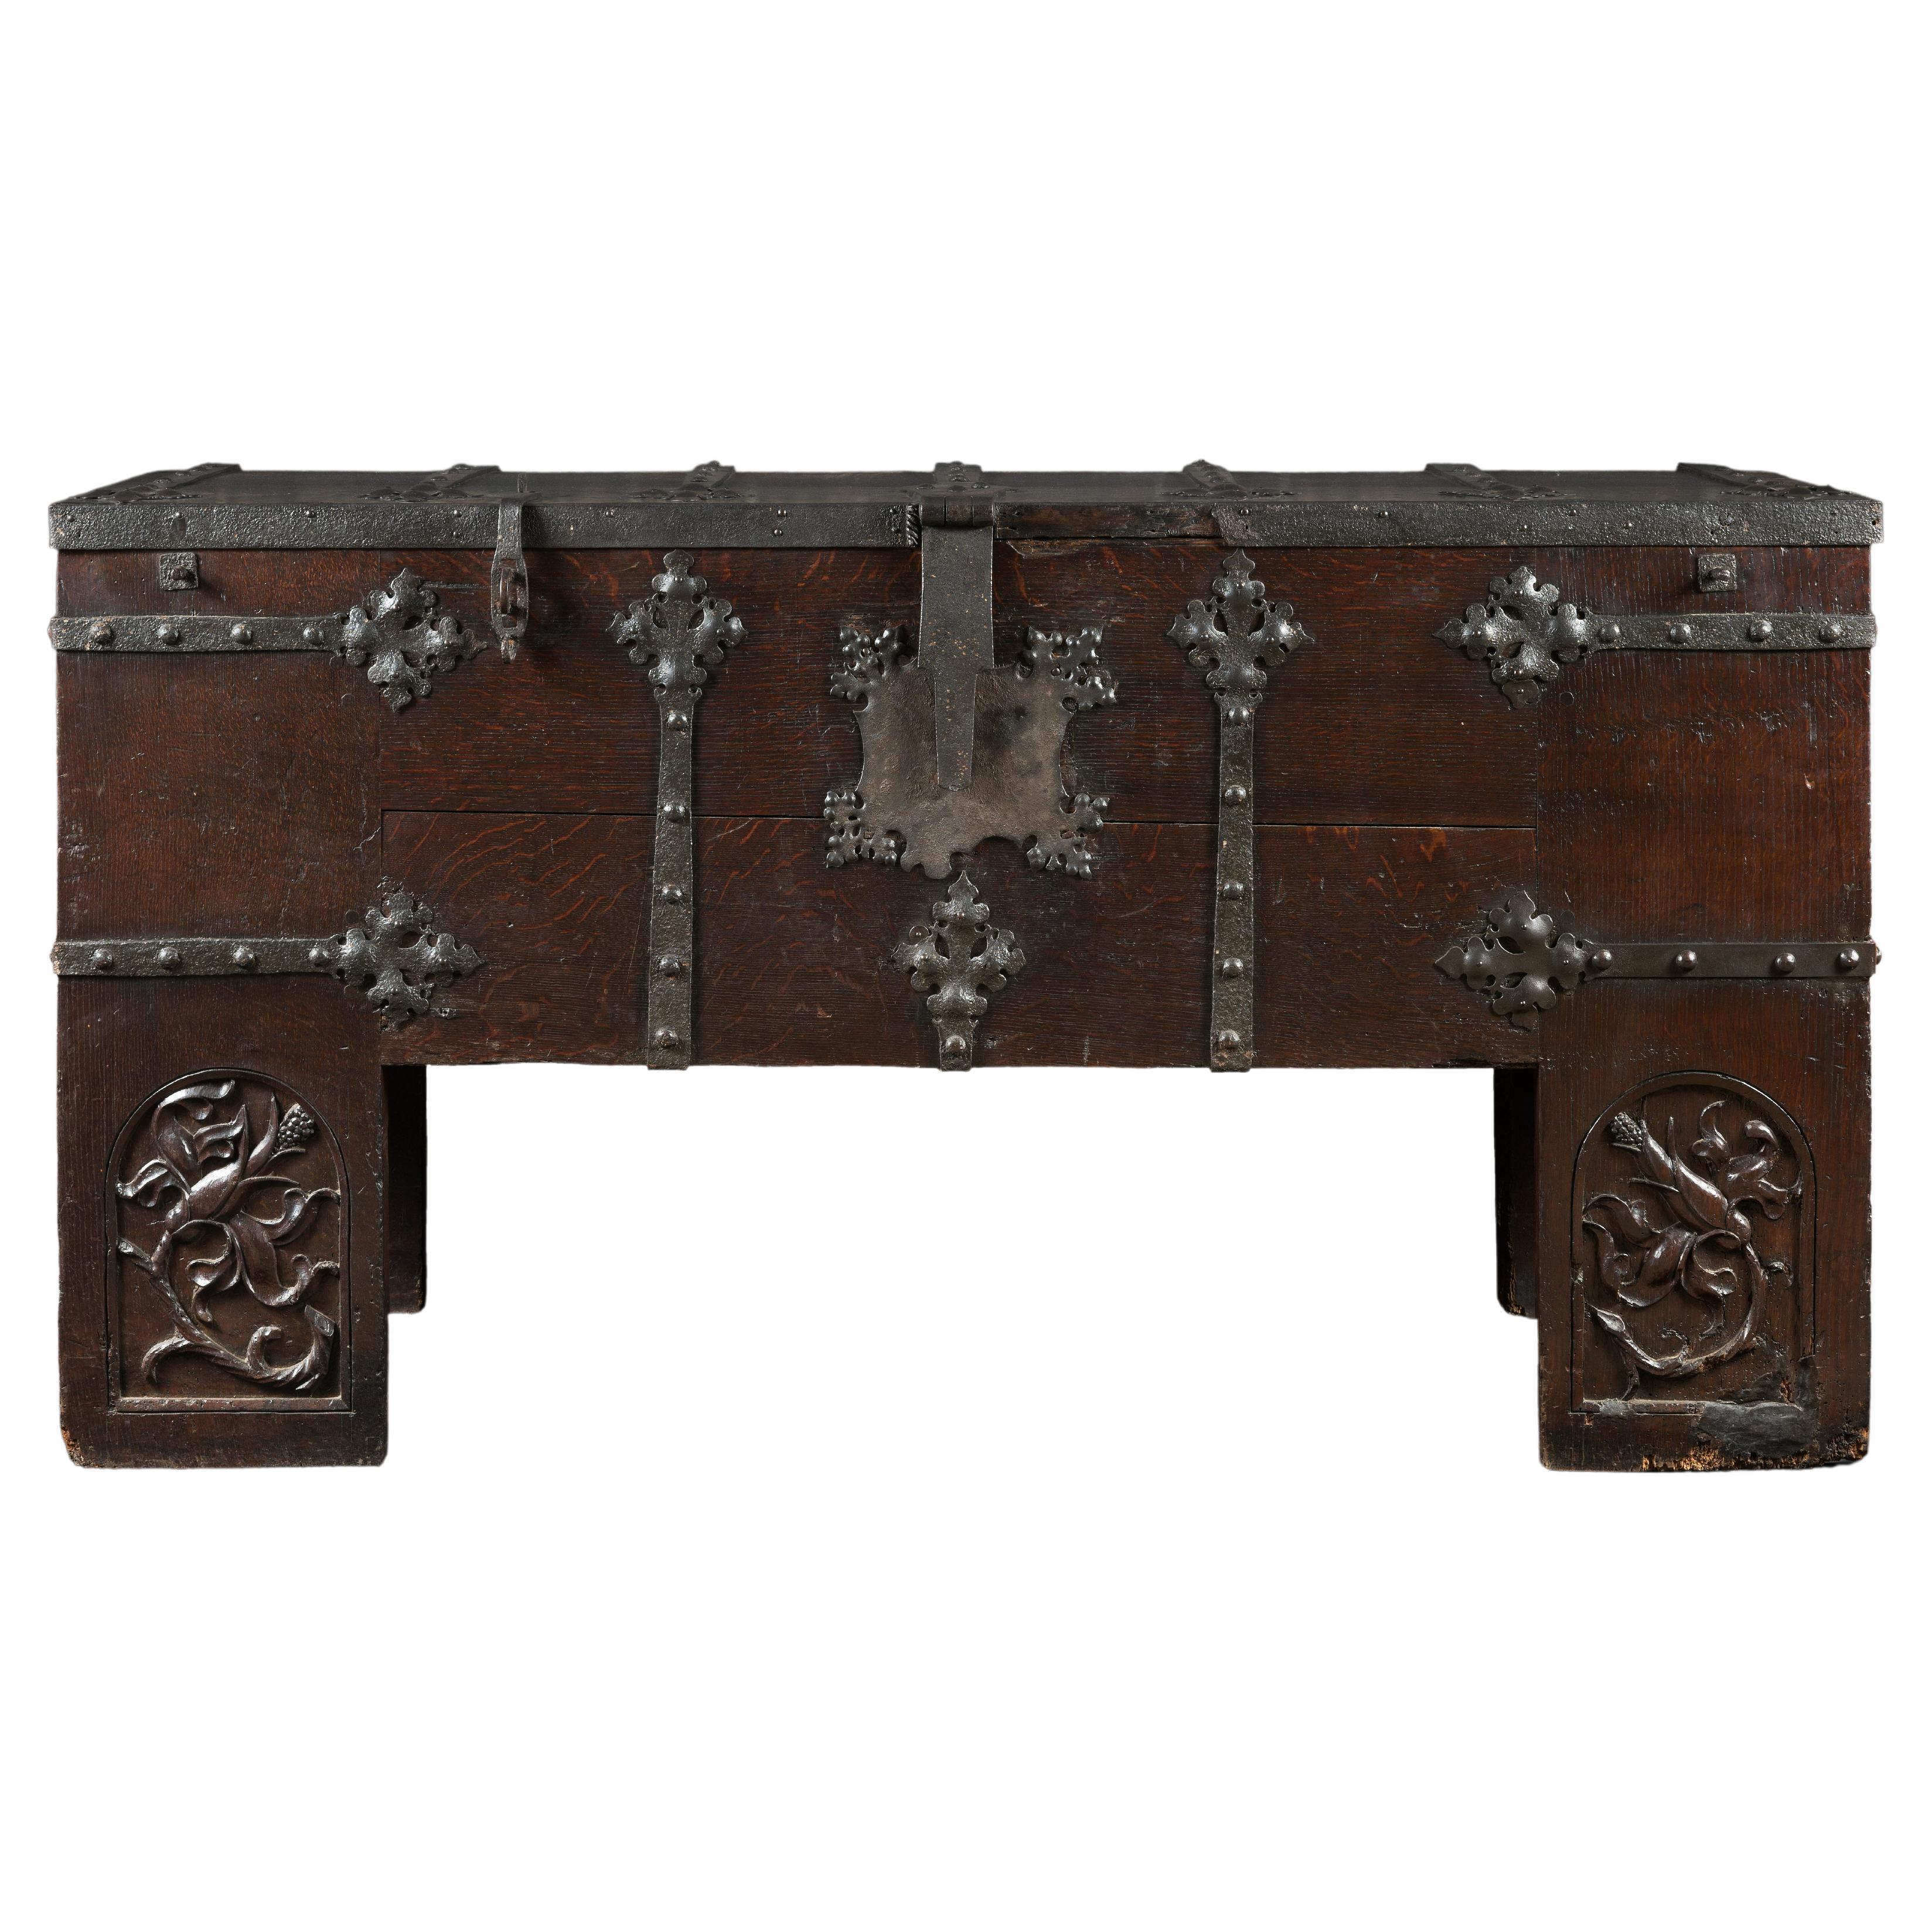 Rare Gothic German Oak and Iron Chest Known as "Stollentruhe" For Sale